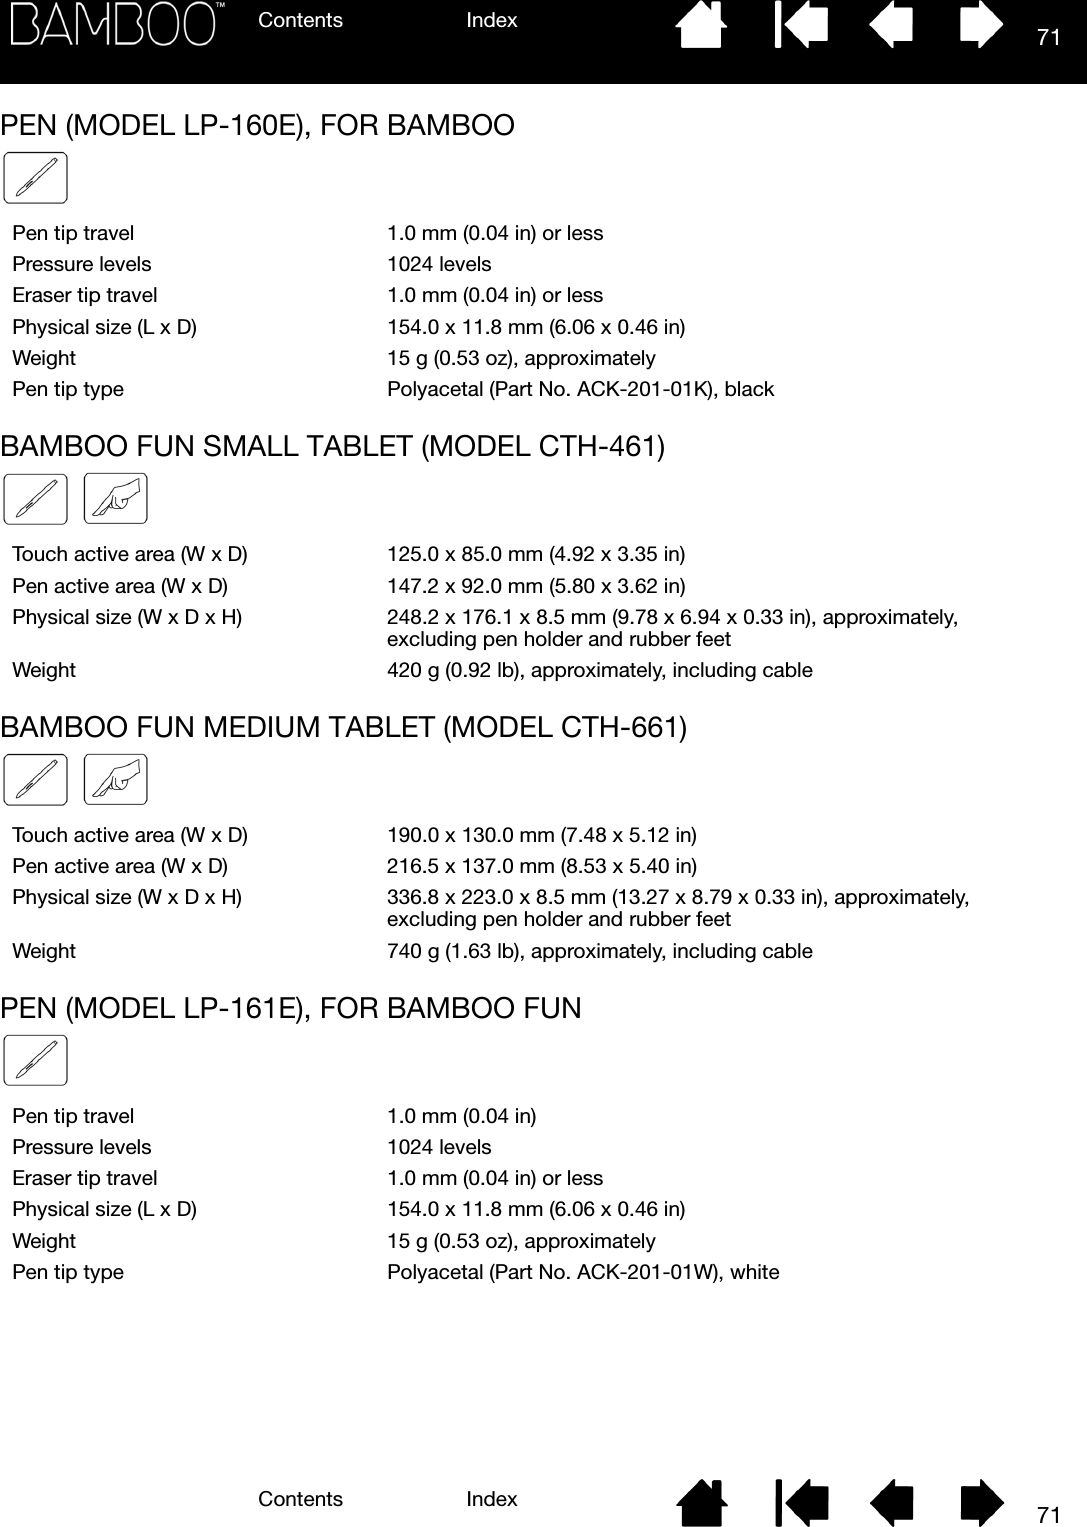 Contents IndexContents 71Index71PEN (MODEL LP-160E), FOR BAMBOOBAMBOO FUN SMALL TABLET (MODEL CTH-461)BAMBOO FUN MEDIUM TABLET (MODEL CTH-661)PEN (MODEL LP-161E), FOR BAMBOO FUNPen tip travel 1.0 mm (0.04 in) or lessPressure levels 1024 levelsEraser tip travel 1.0 mm (0.04 in) or lessPhysical size (L x D) 154.0 x 11.8 mm (6.06 x 0.46 in)Weight 15 g (0.53 oz), approximatelyPen tip type Polyacetal (Part No. ACK-201-01K), blackTouch active area (W x D) 125.0 x 85.0 mm (4.92 x 3.35 in)Pen active area (W x D) 147.2 x 92.0 mm (5.80 x 3.62 in)Physical size (W x D x H) 248.2 x 176.1 x 8.5 mm (9.78 x 6.94 x 0.33 in), approximately, excluding pen holder and rubber feetWeight 420 g (0.92 lb), approximately, including cableTouch active area (W x D) 190.0 x 130.0 mm (7.48 x 5.12 in)Pen active area (W x D) 216.5 x 137.0 mm (8.53 x 5.40 in)Physical size (W x D x H) 336.8 x 223.0 x 8.5 mm (13.27 x 8.79 x 0.33 in), approximately, excluding pen holder and rubber feetWeight 740 g (1.63 lb), approximately, including cablePen tip travel 1.0 mm (0.04 in)Pressure levels 1024 levelsEraser tip travel 1.0 mm (0.04 in) or lessPhysical size (L x D) 154.0 x 11.8 mm (6.06 x 0.46 in)Weight 15 g (0.53 oz), approximatelyPen tip type Polyacetal (Part No. ACK-201-01W), white